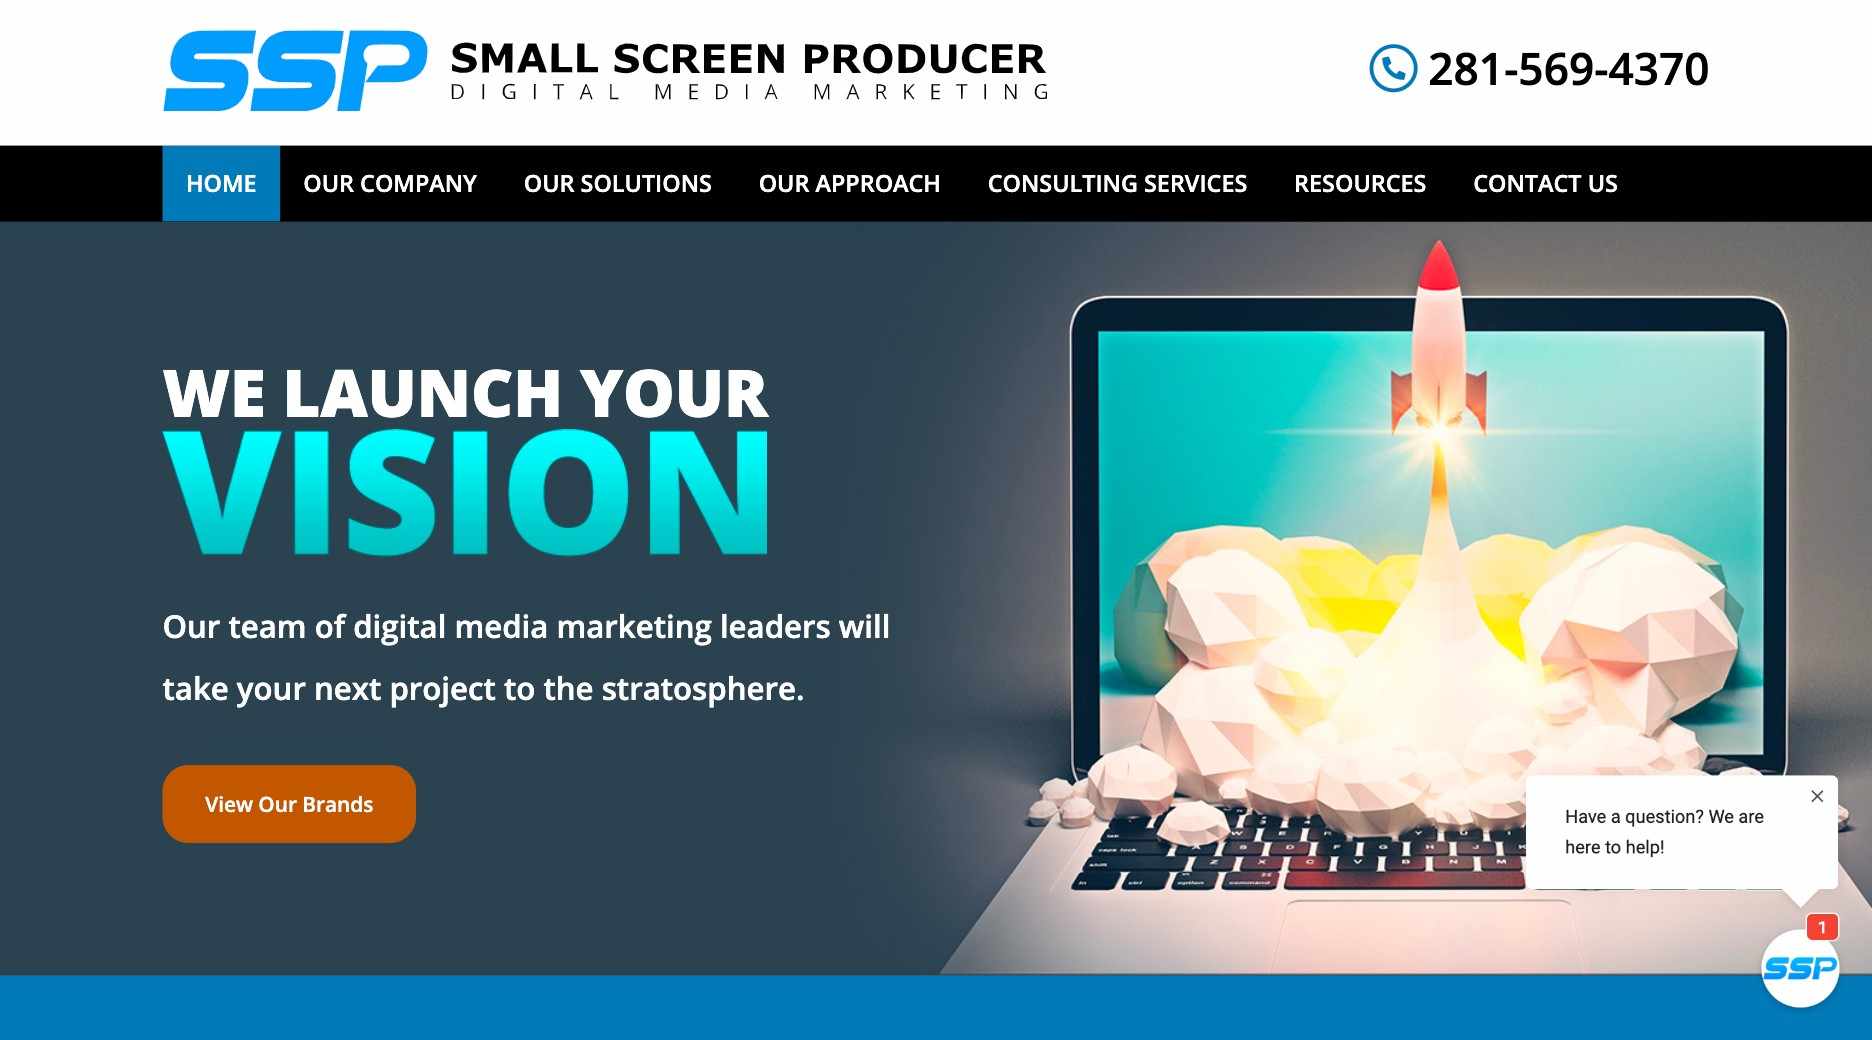 Small Screen Producer